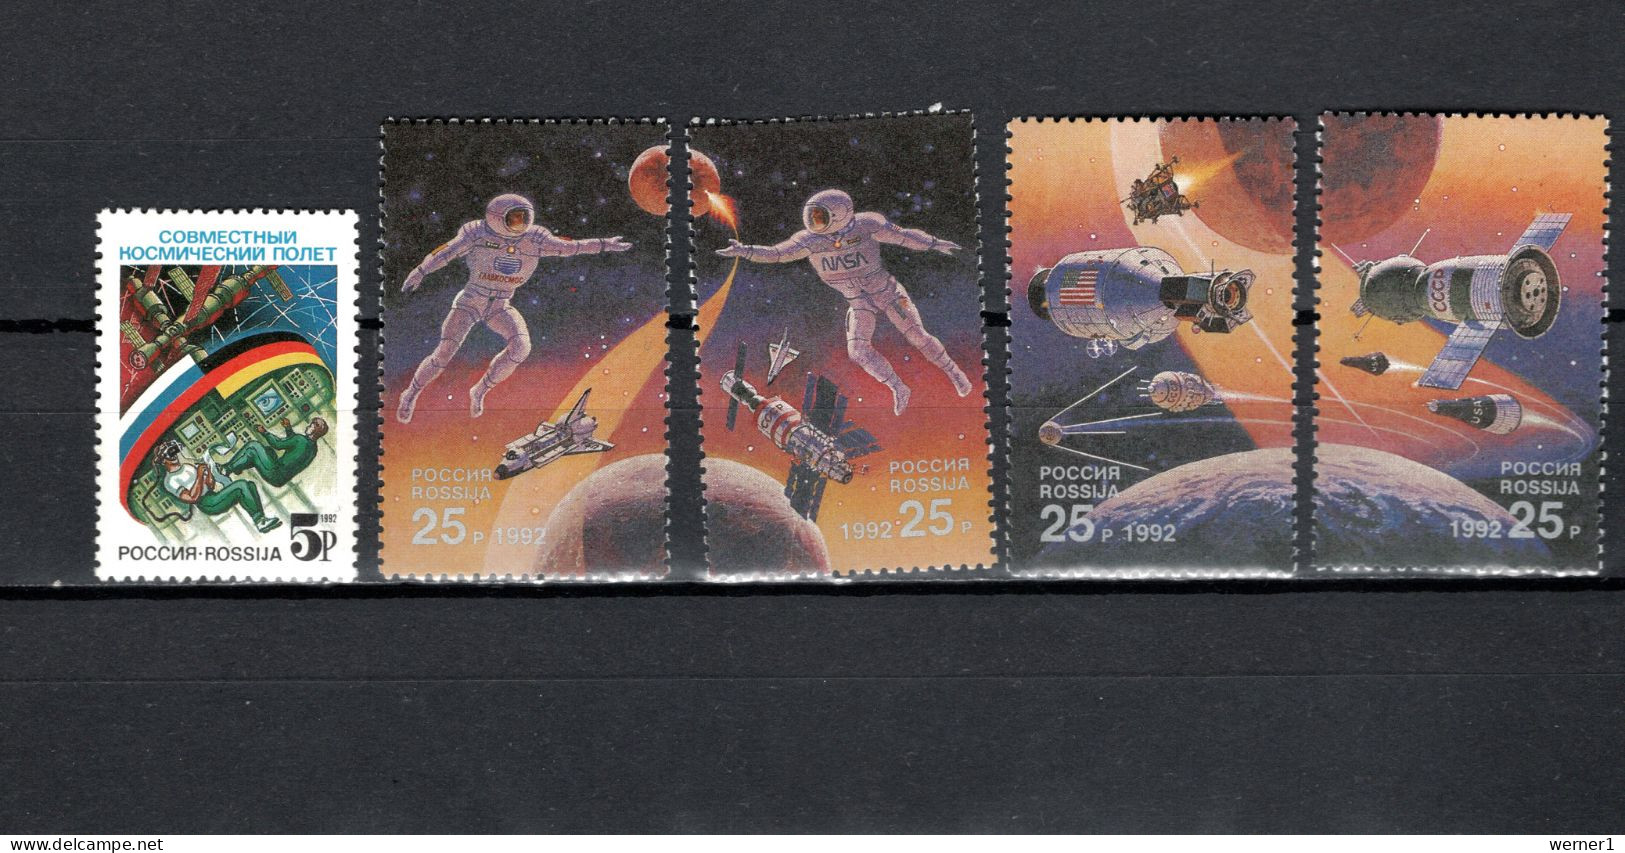 Russia 1992 Space, Russia-Germany Joint Spaceflight, Int. Space Year 5 Stamps MNH - Rusland En USSR